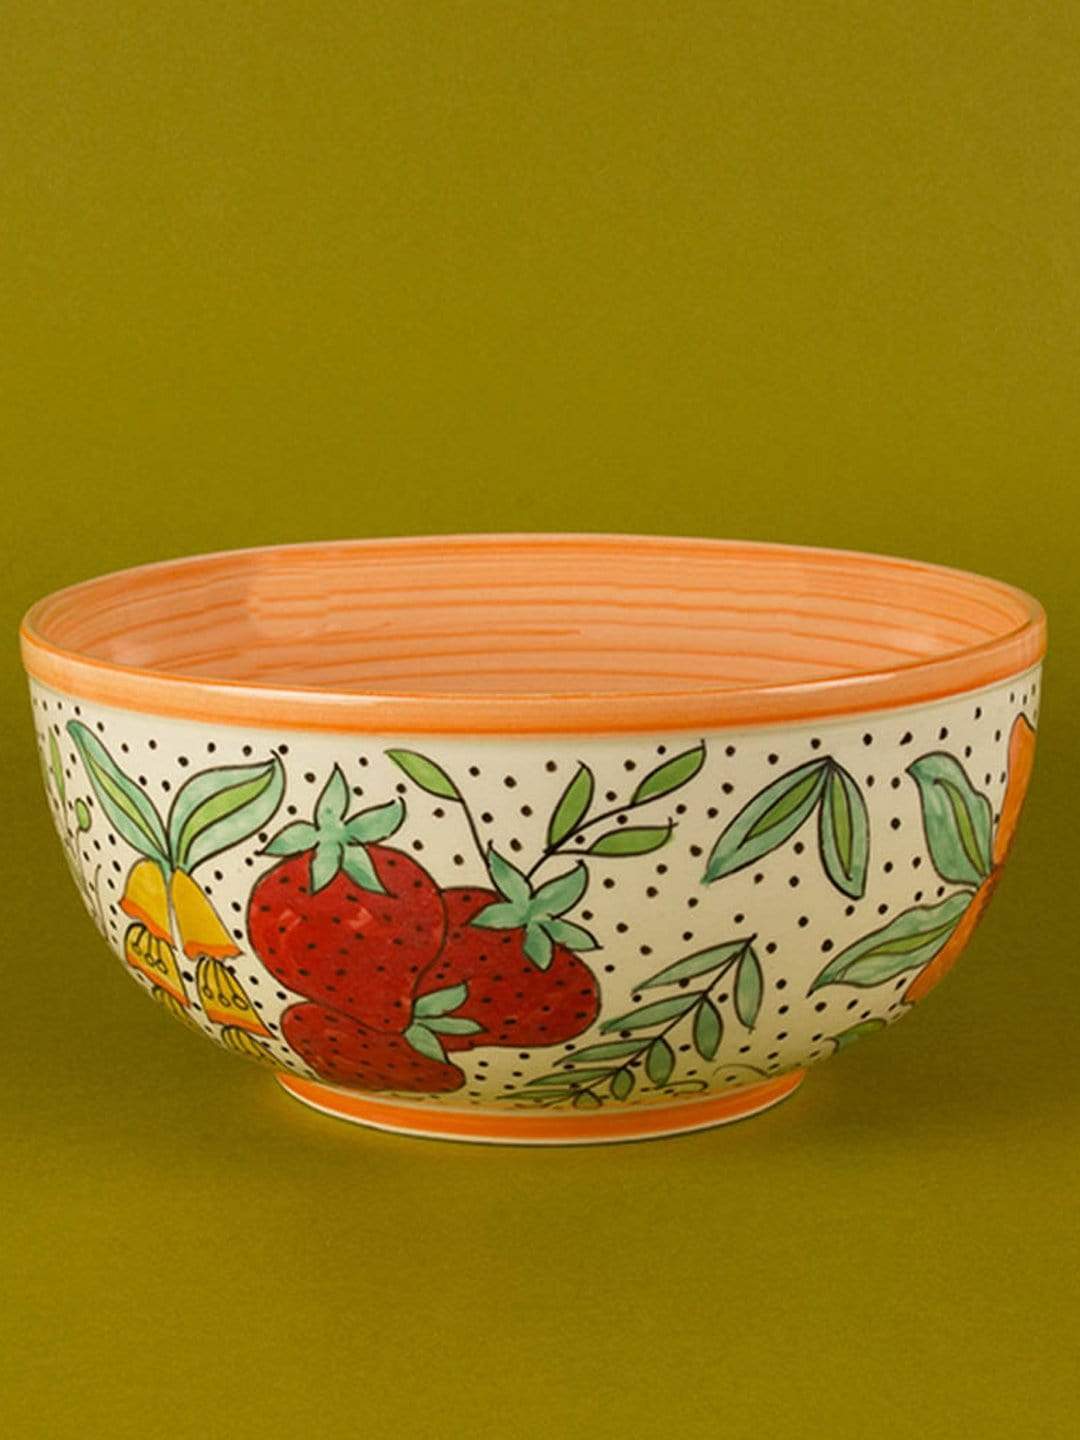 Citrus Garden BowlMaterial: Handpainted Handmade Stoneware
Dimensions: Large - 9.50 Dia x 5 H Inch , Small - 6 Dia x 3.50 H Inch

Handle with care. May Chip or Break on Impact. MicrowCitrus Garden BowlThe Wishing Chair